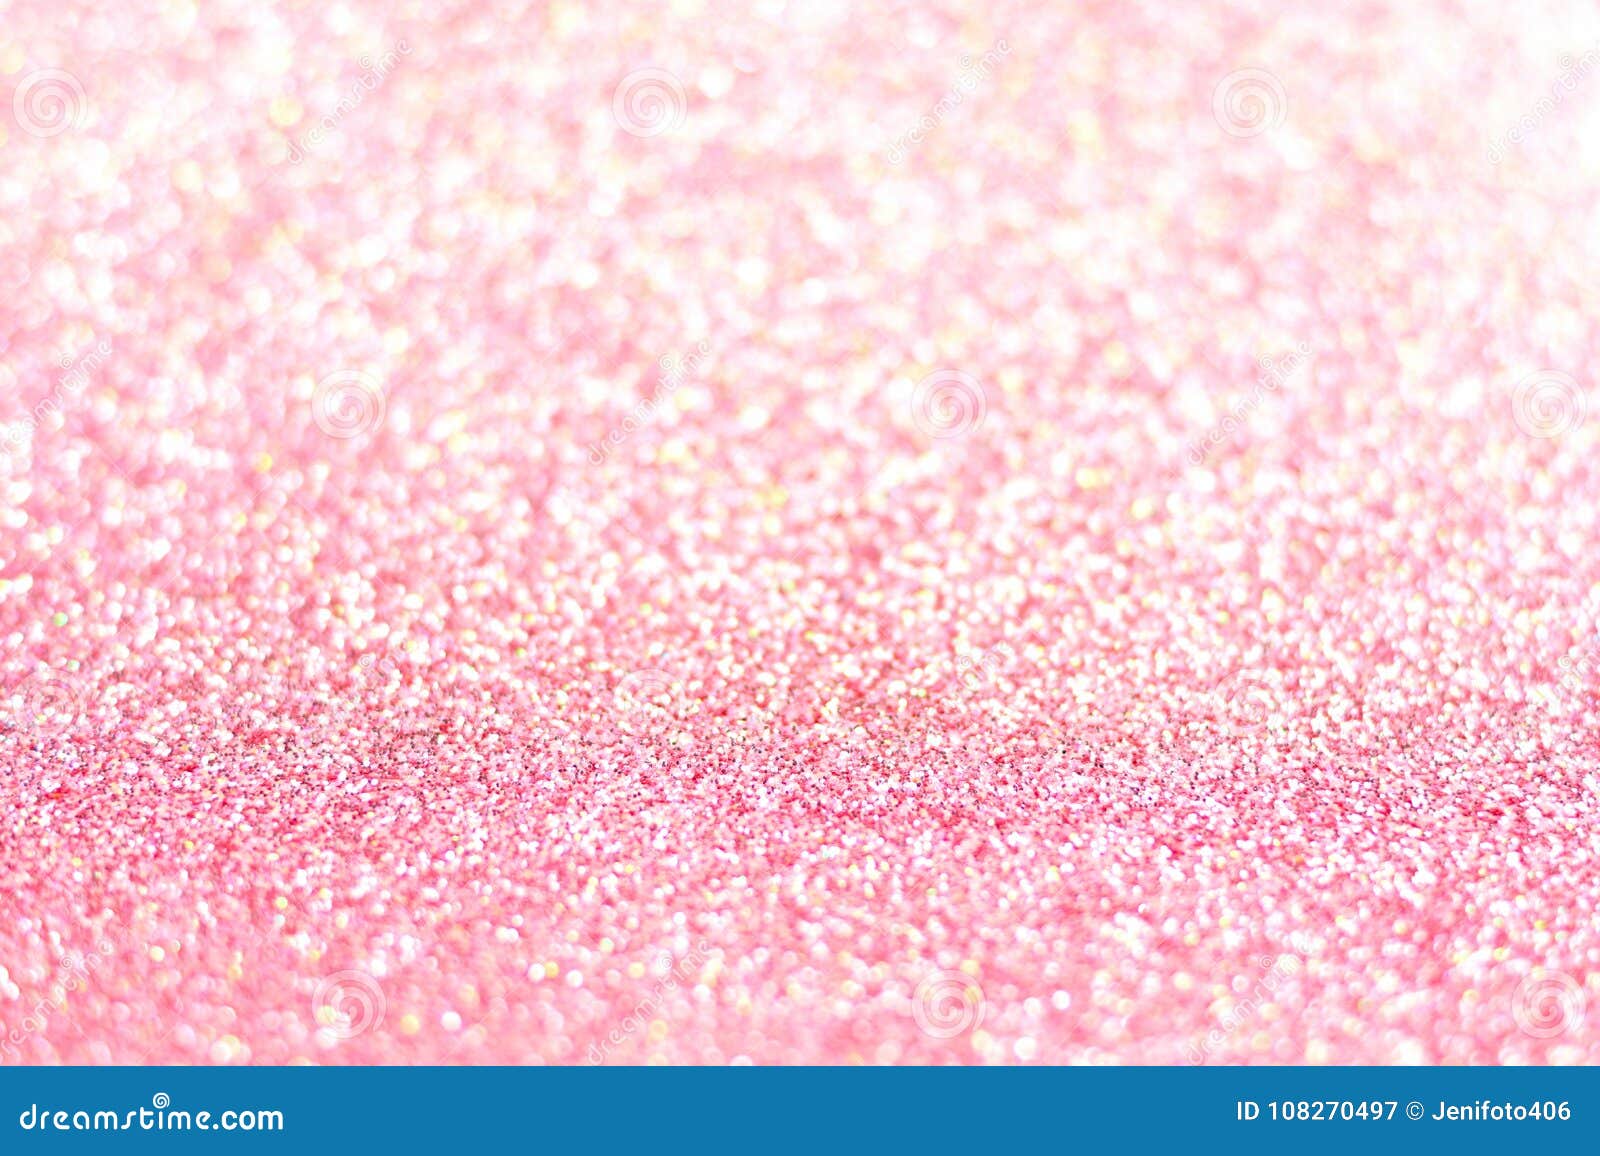 Pink Glitter Background with Selective Focus Stock Image - Image of color,  glowing: 108270497